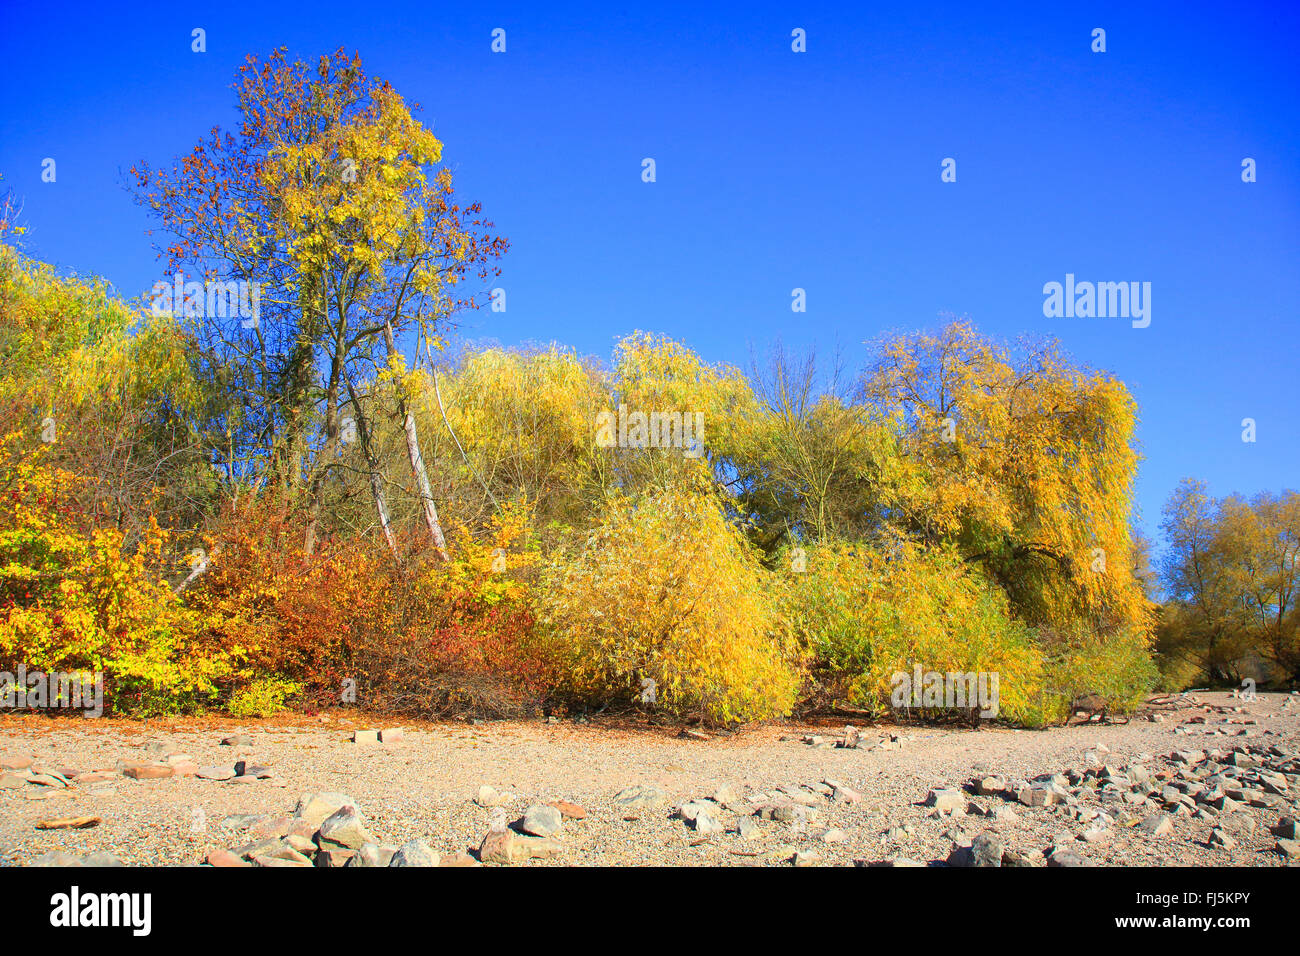 floodplain forest at river Rhine with low water level, Germany, Baden-Wuerttemberg, Mannheim Stock Photo